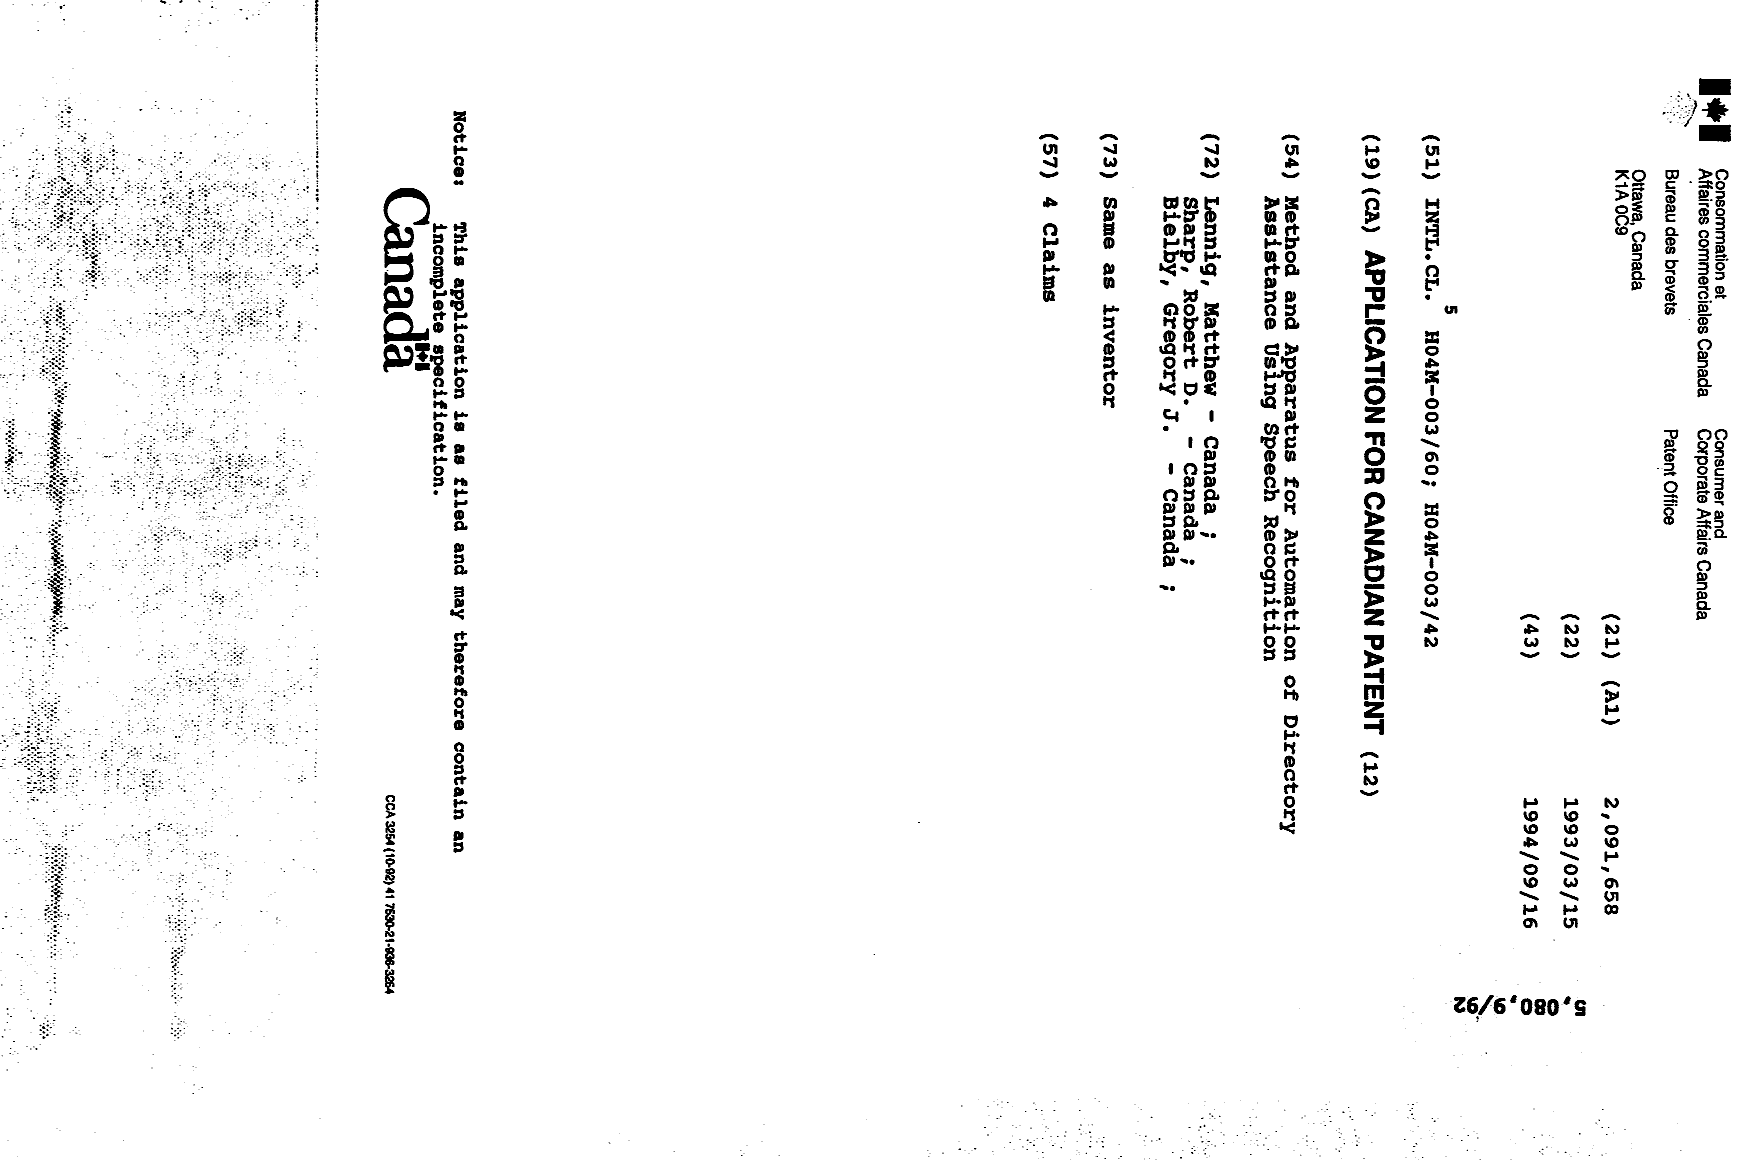 Canadian Patent Document 2091658. Cover Page 19941218. Image 1 of 1